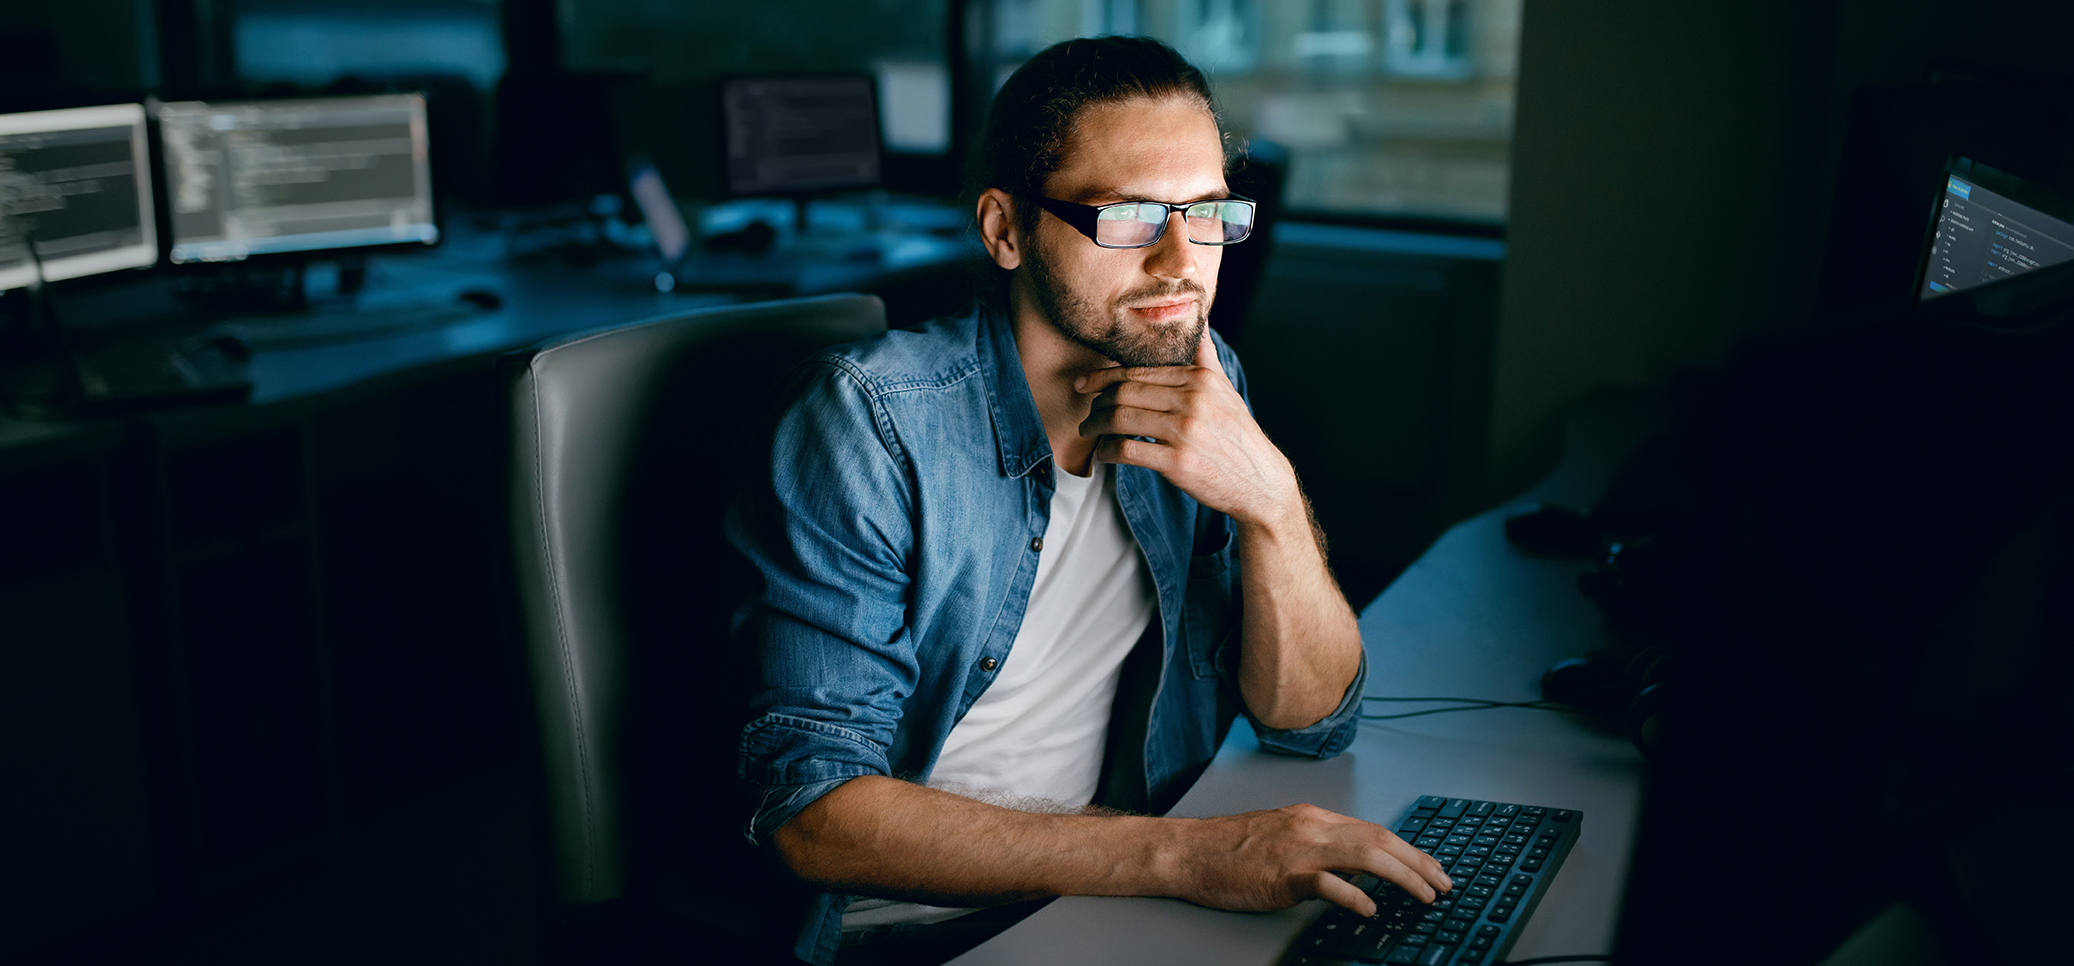 White male in his thirties with dark hair, beard, and glasses sits at a desk and stares thoughtfully at his computer monitor.  The background is blurred. Other computer monitors can be seen behind him on another desk area.